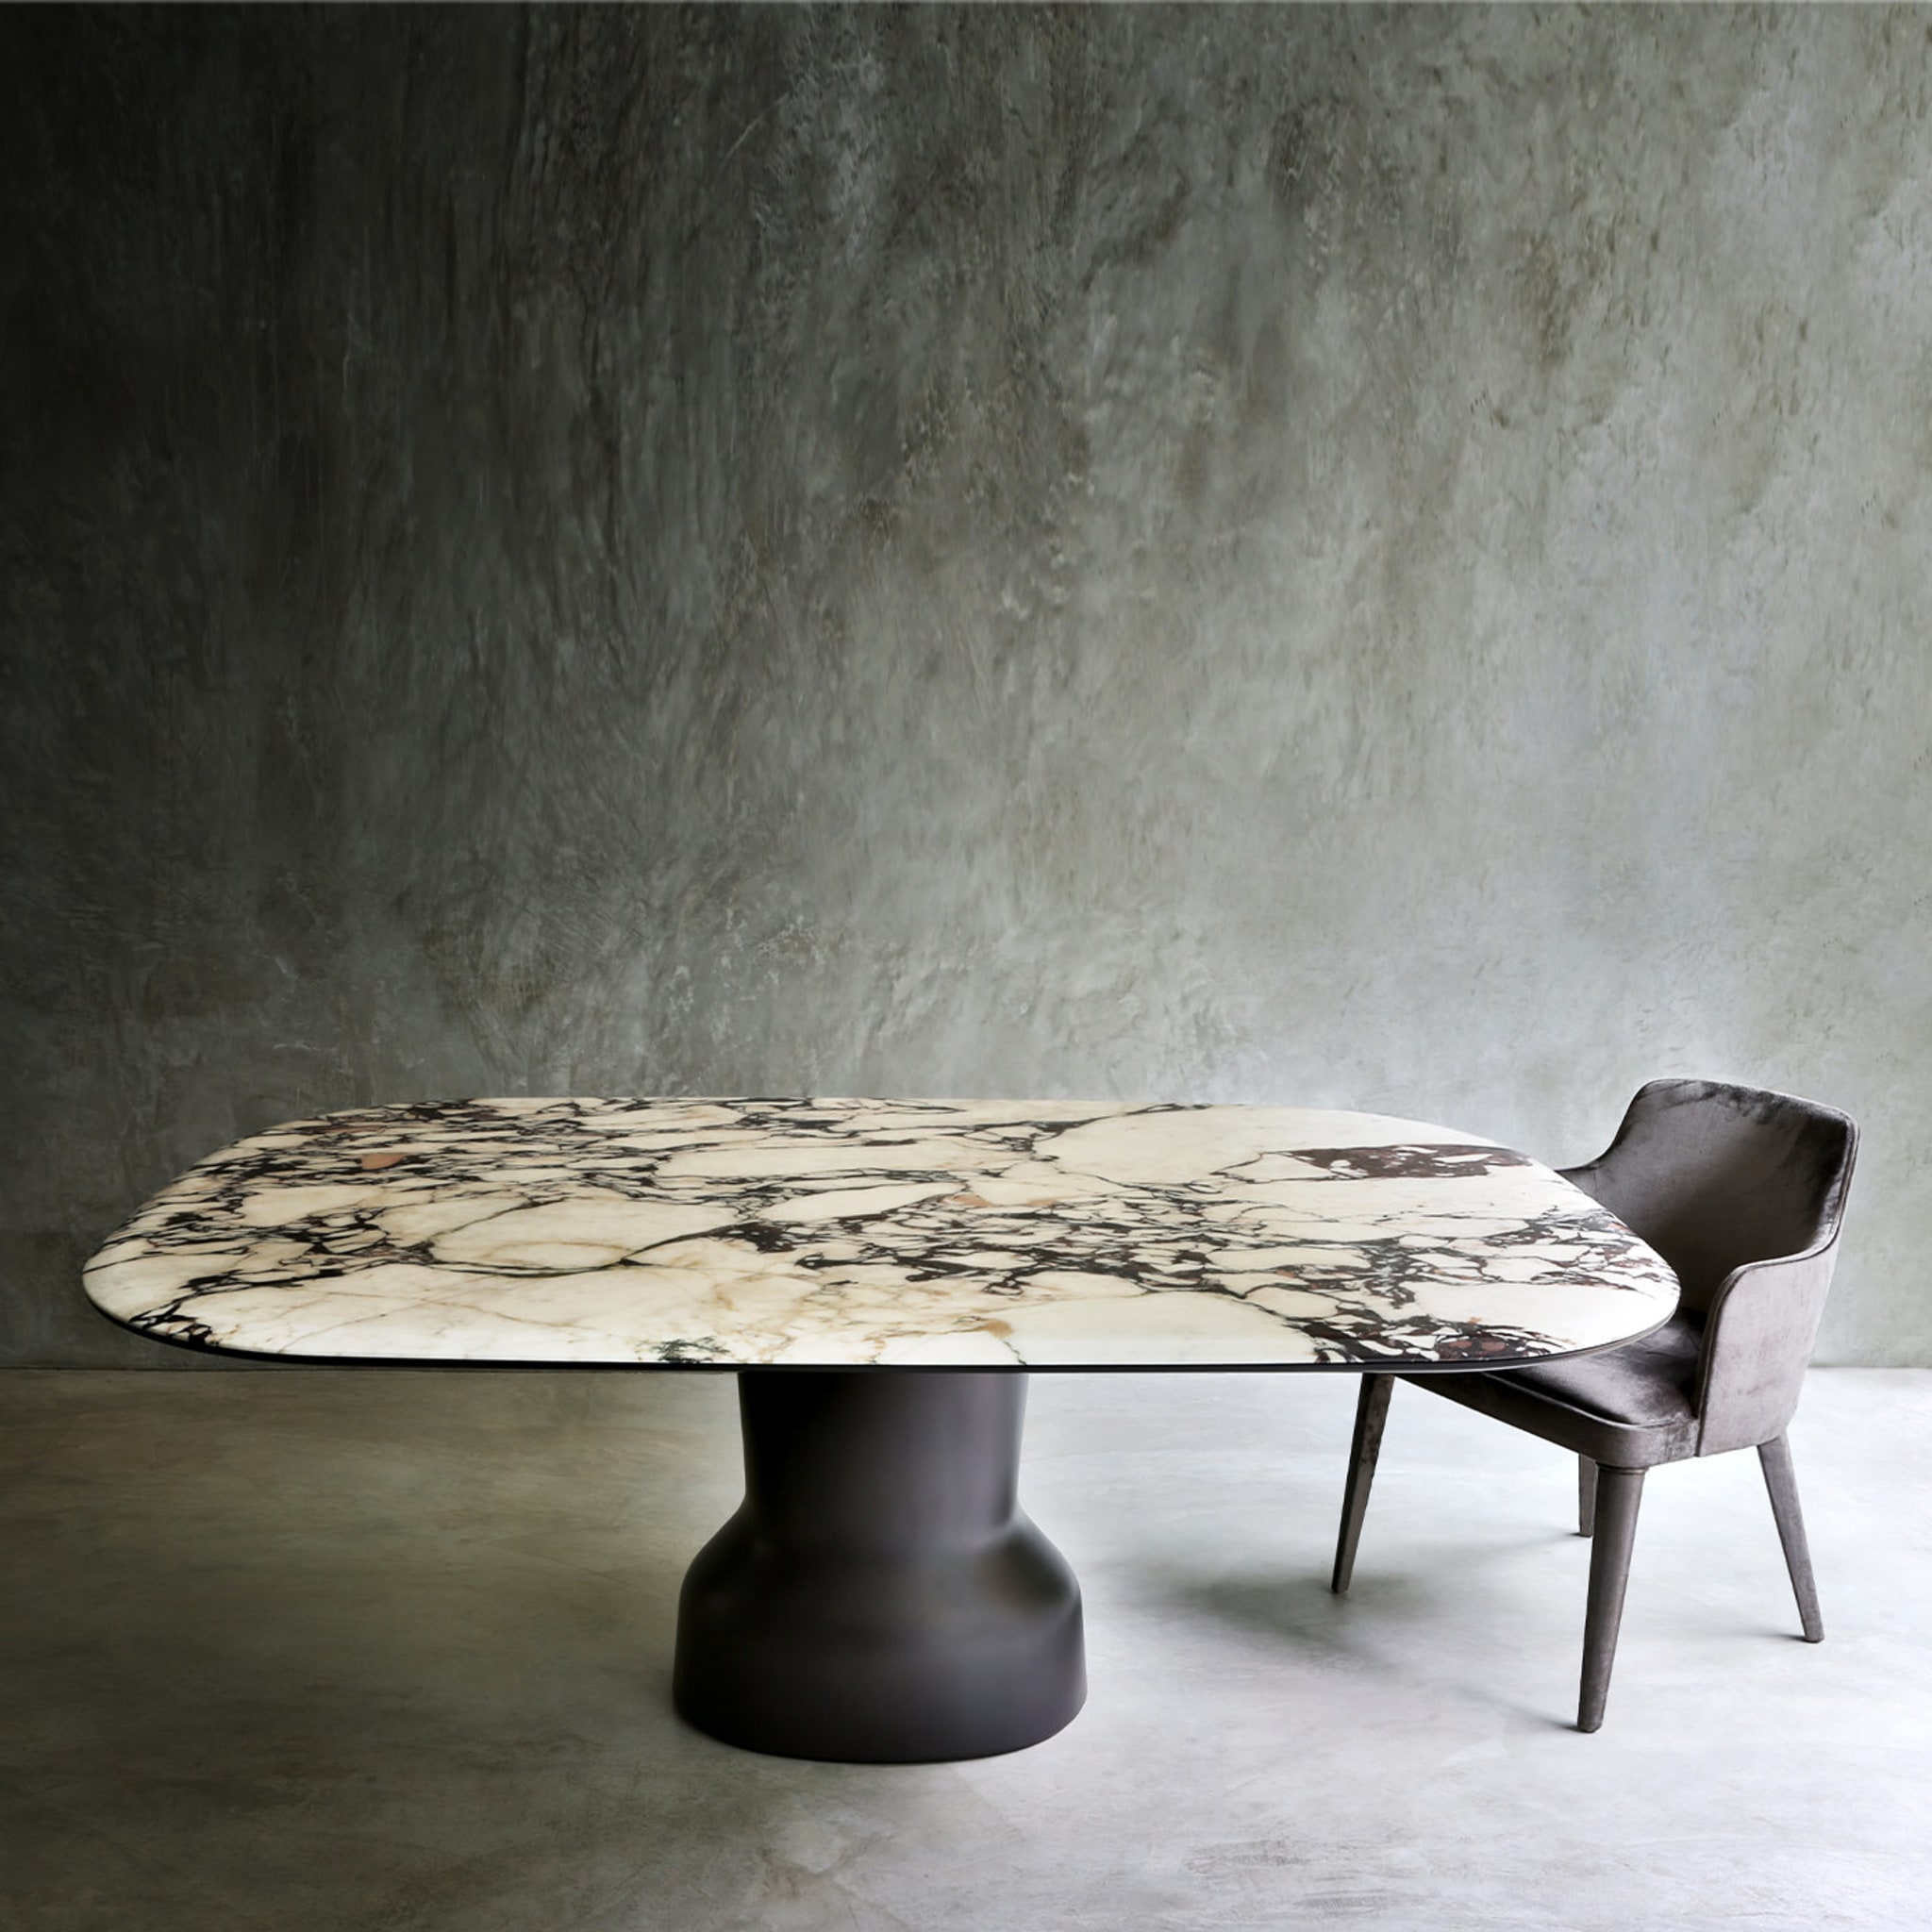 Musa Table by Emanuele Genuizzi - Alternative view 1